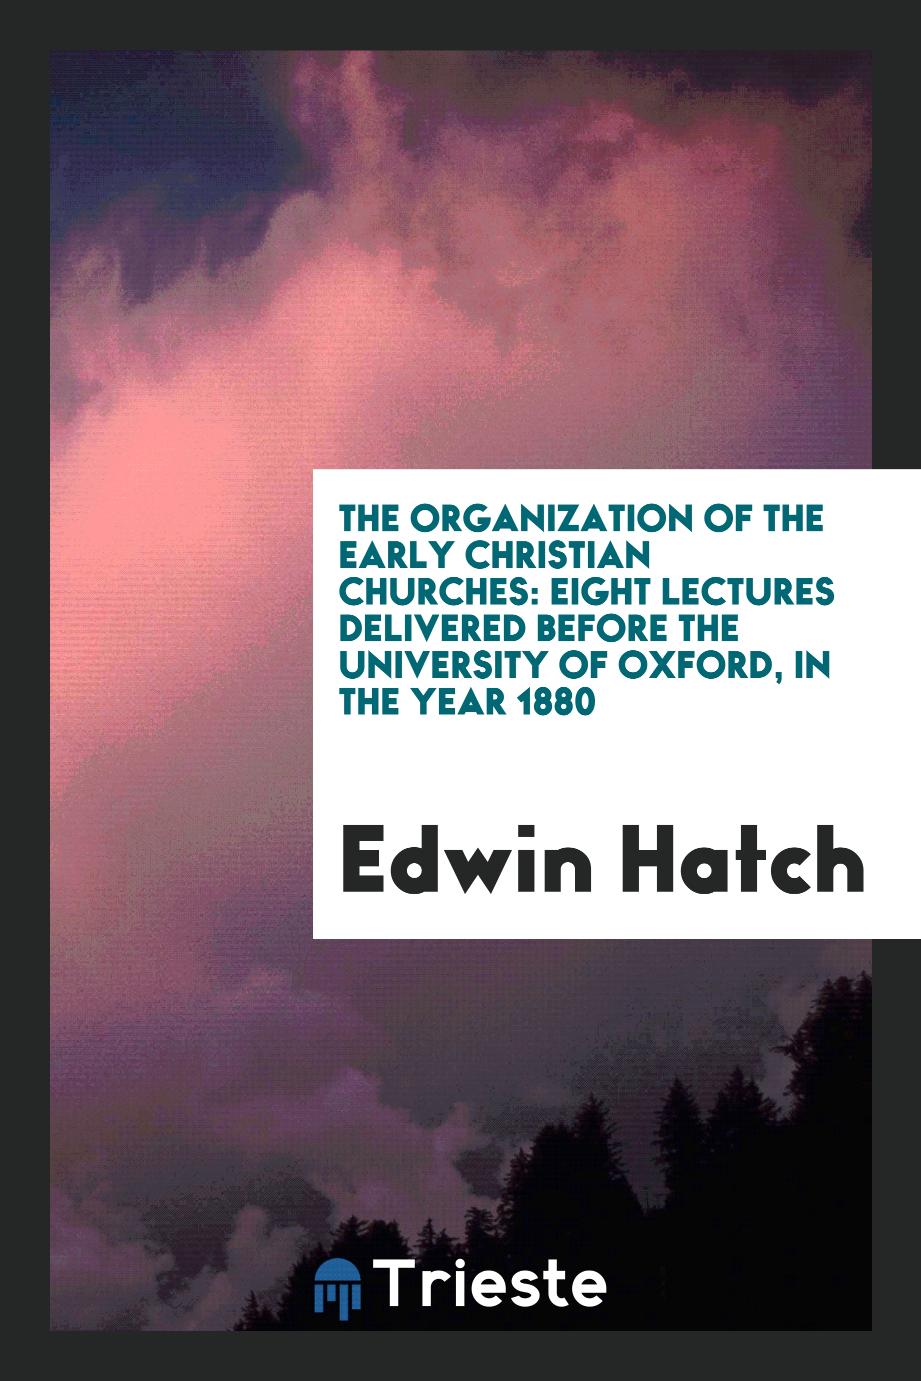 The organization of the early Christian churches: eight lectures delivered before the University of Oxford, in the year 1880